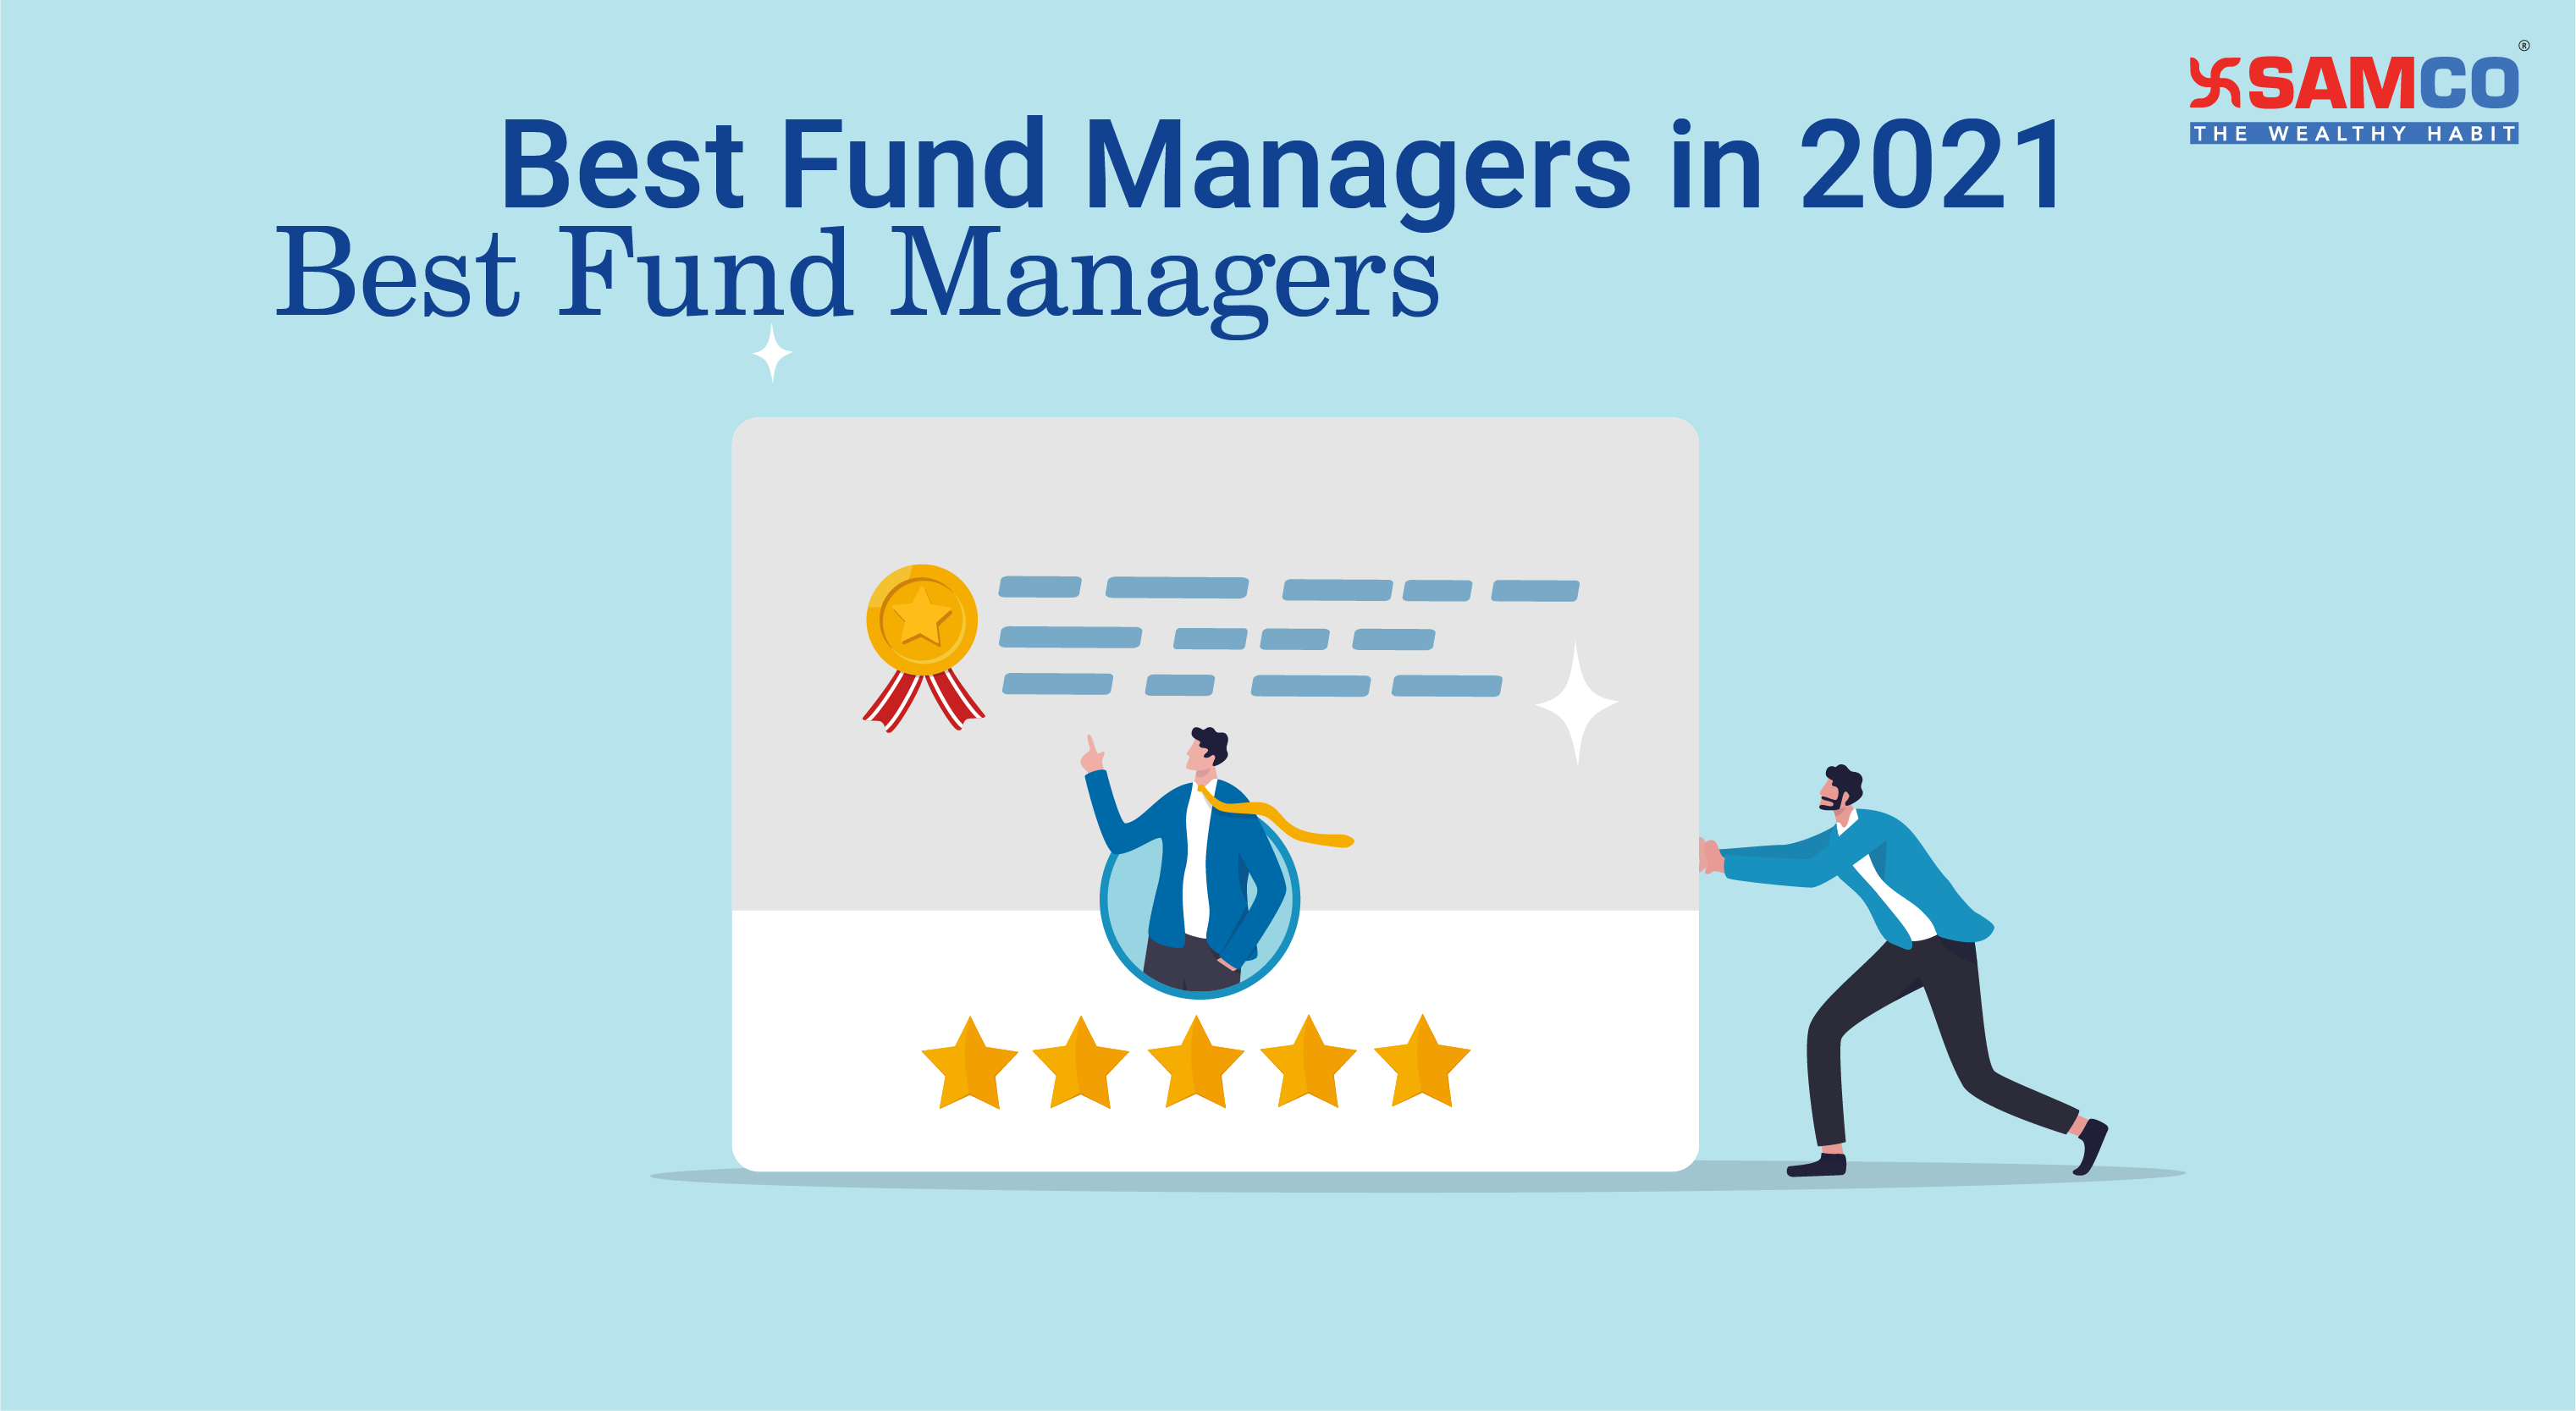 Best Fund Managers in 2021